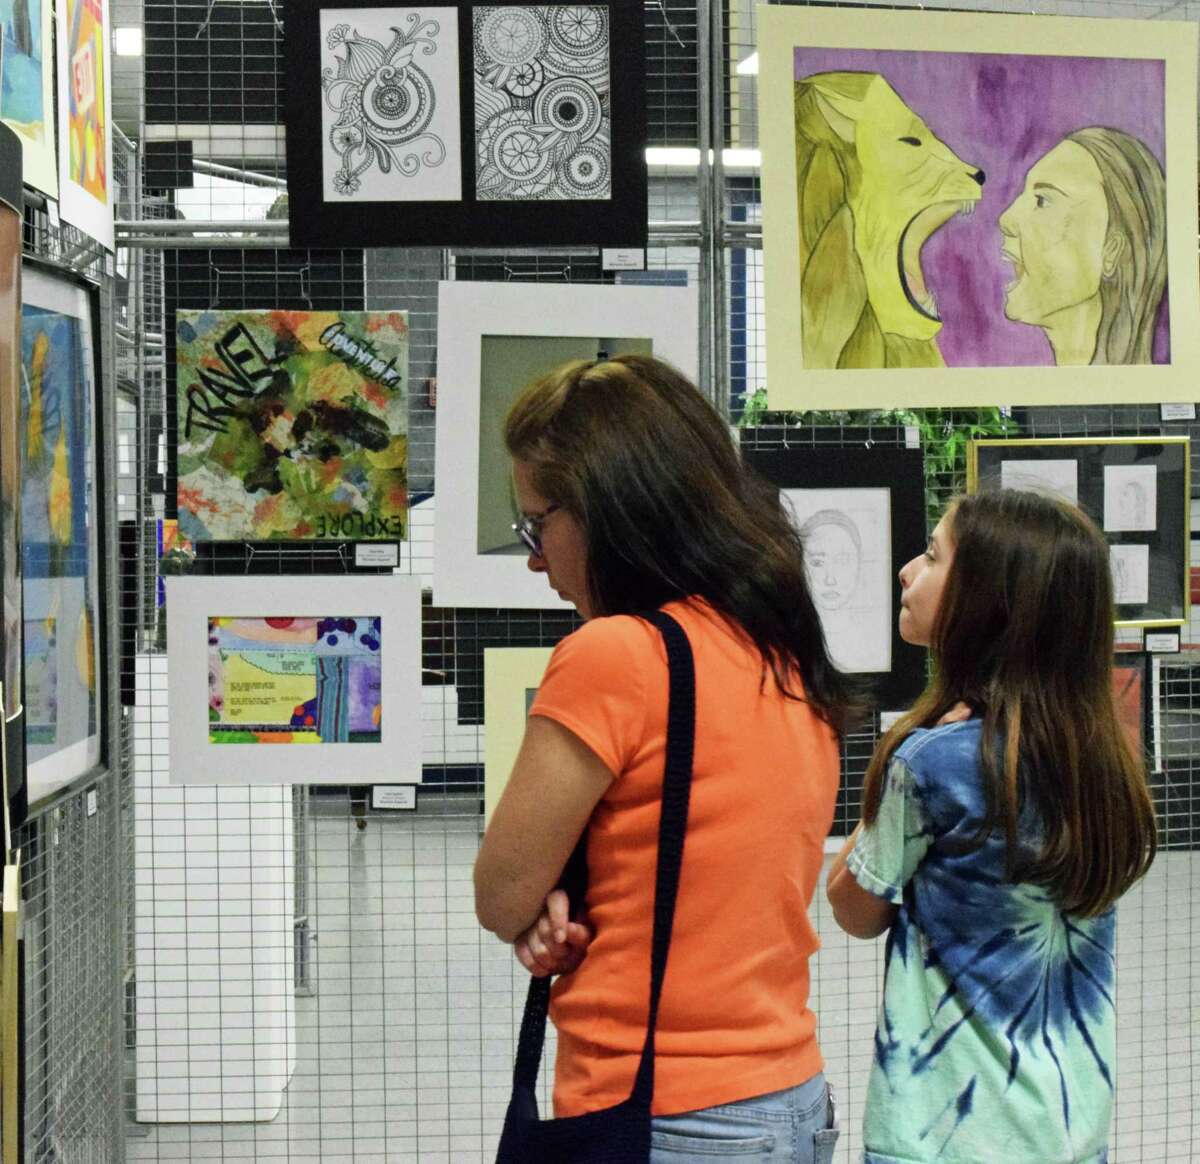 Julia Squeglia and her daughter, Ava, peruse the variety of art mediums at the art show.